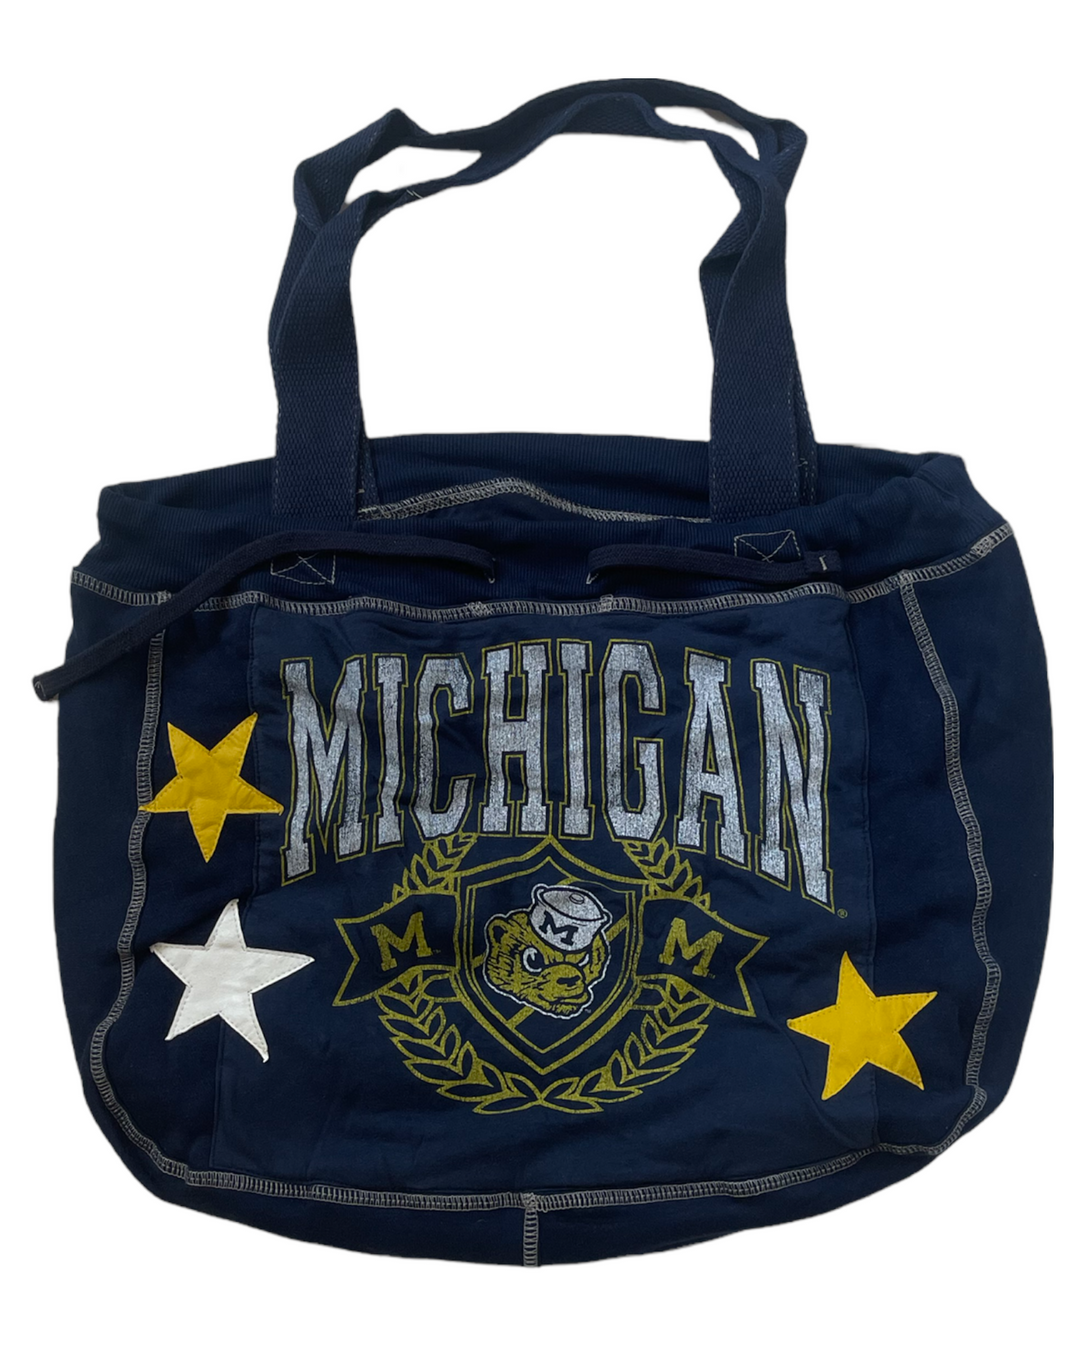 Patched Up Michigan Tote